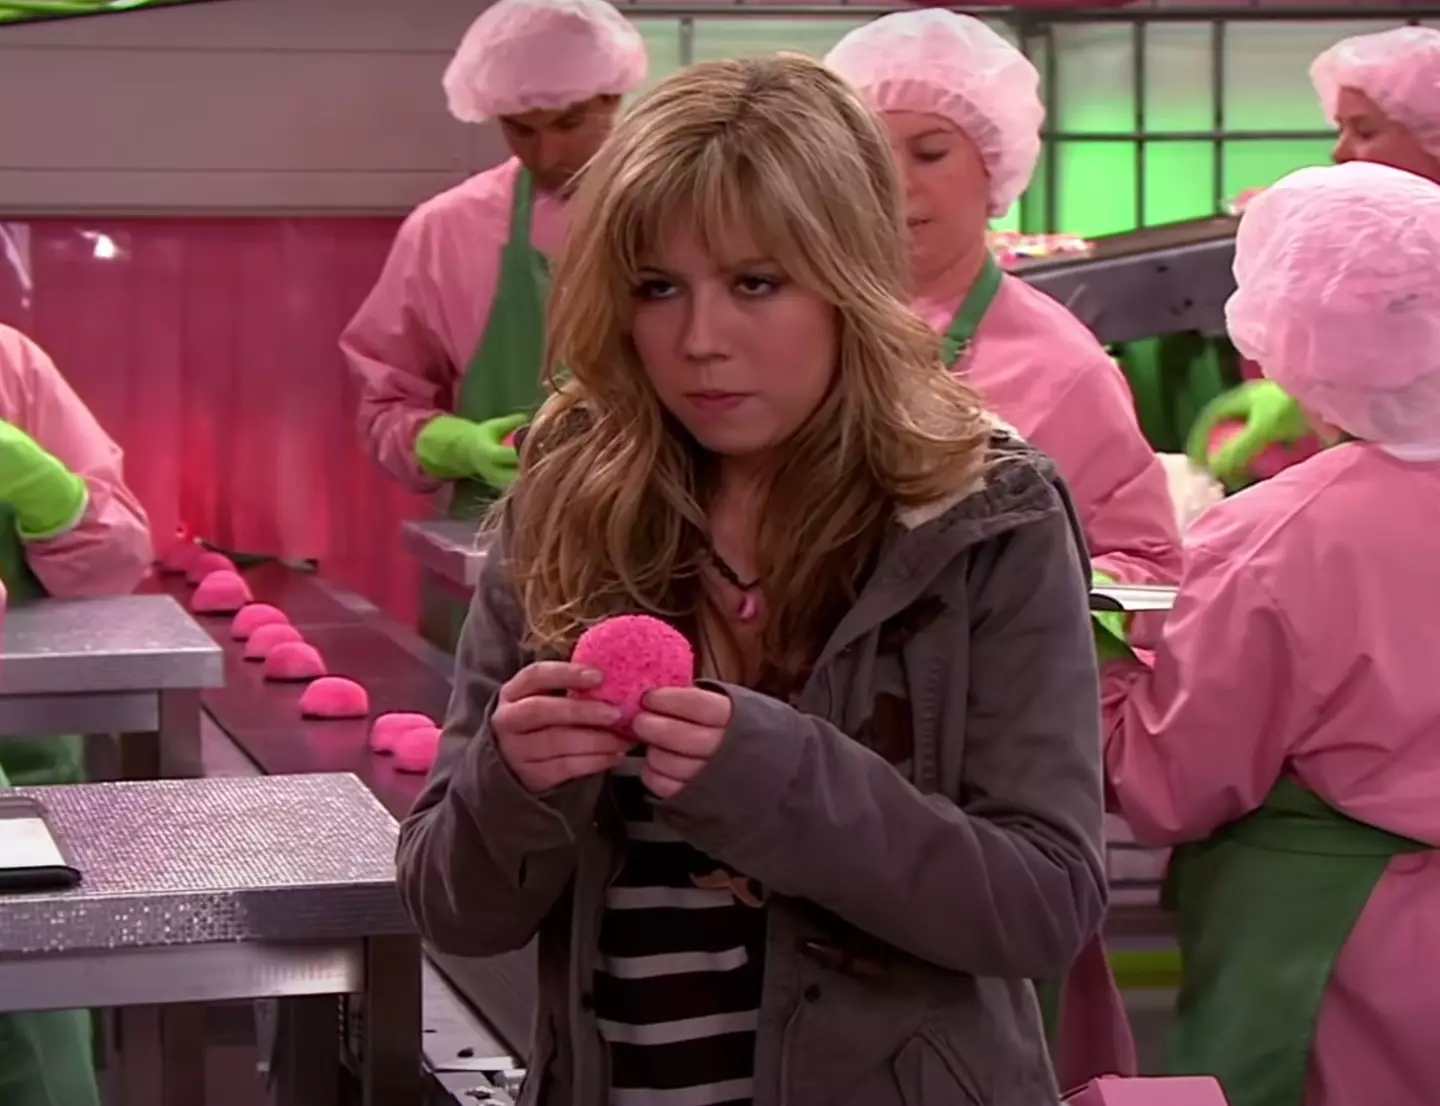 Jennette's character had a passion for food.